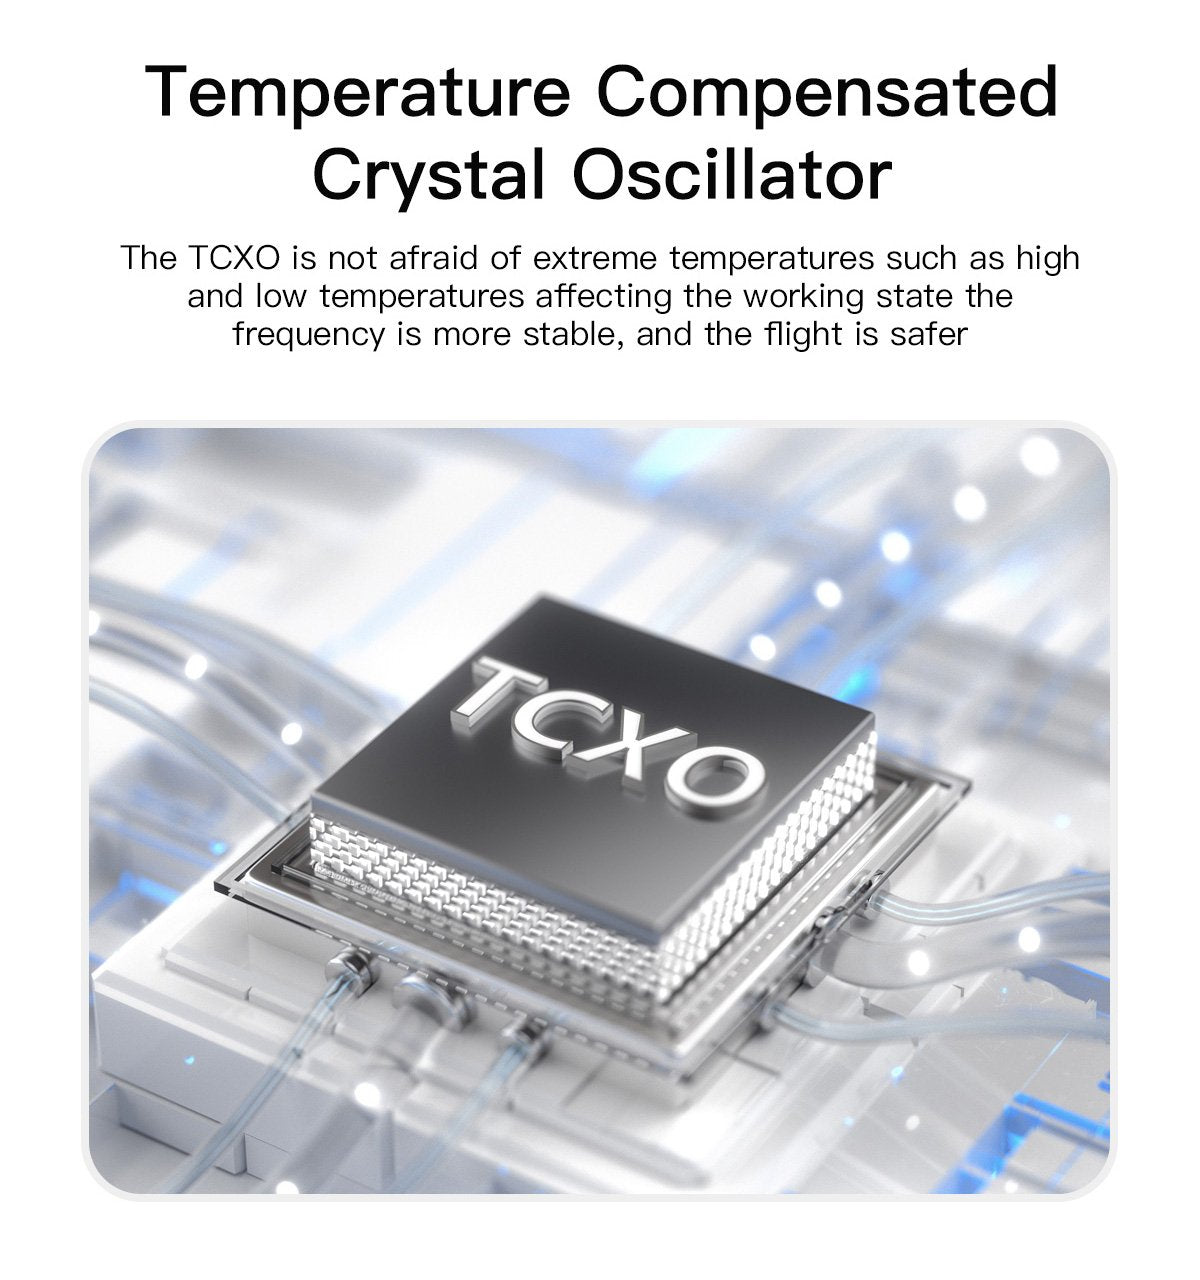 TCXO is not afraid of extreme temperatures such as high and low temperatures affecting the